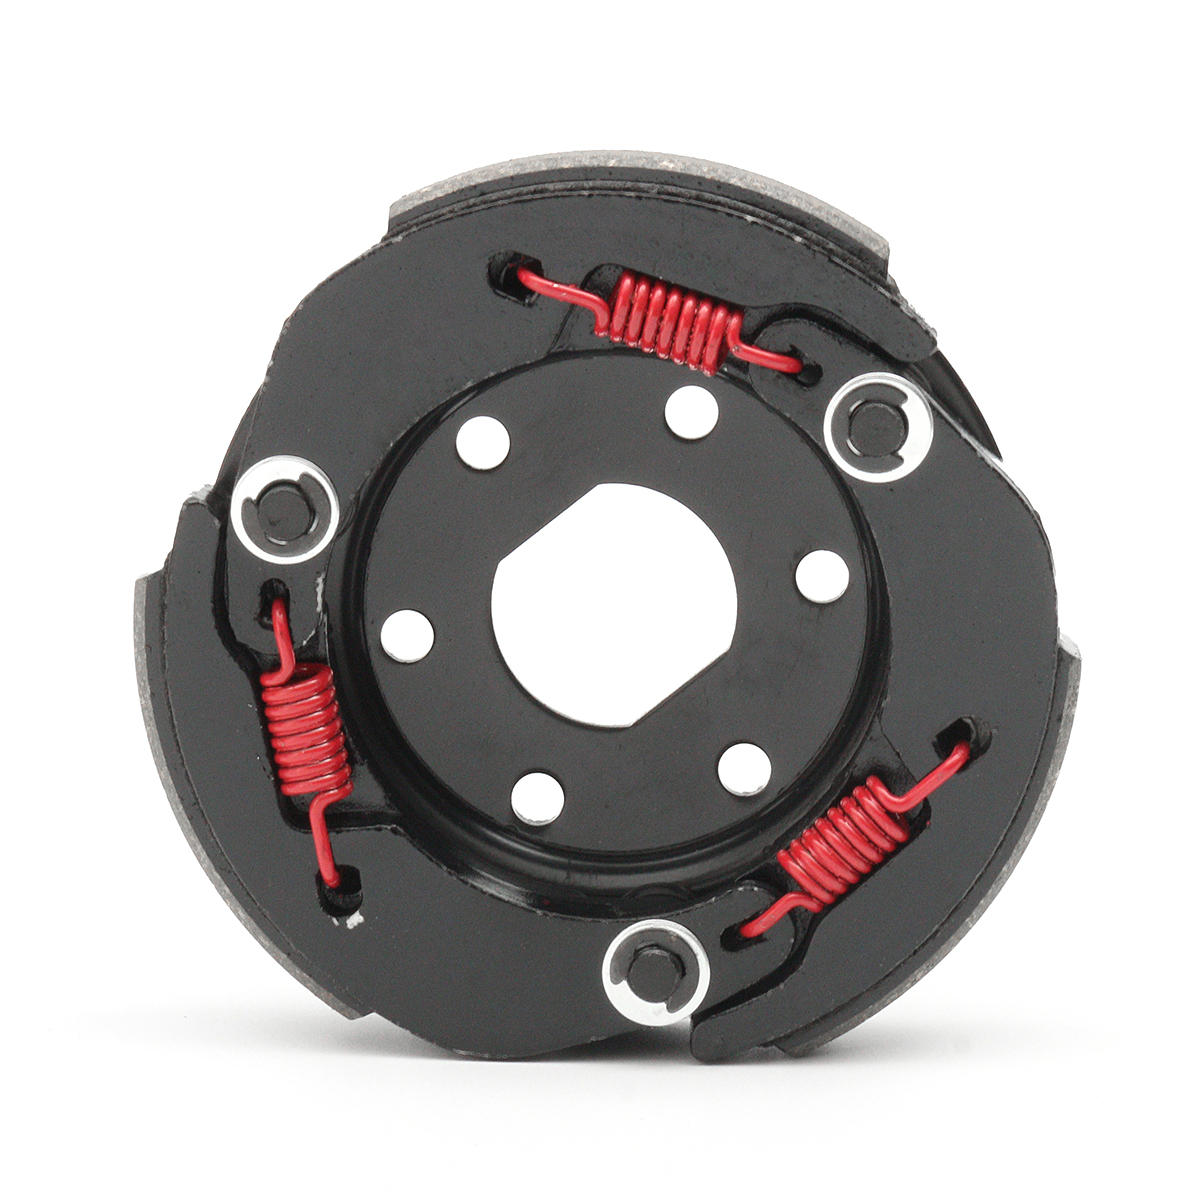 GY6 50cc 139QMB Prestatie Racing Clutch Assembly Voor Chinese Scooter Bromfiets ATV